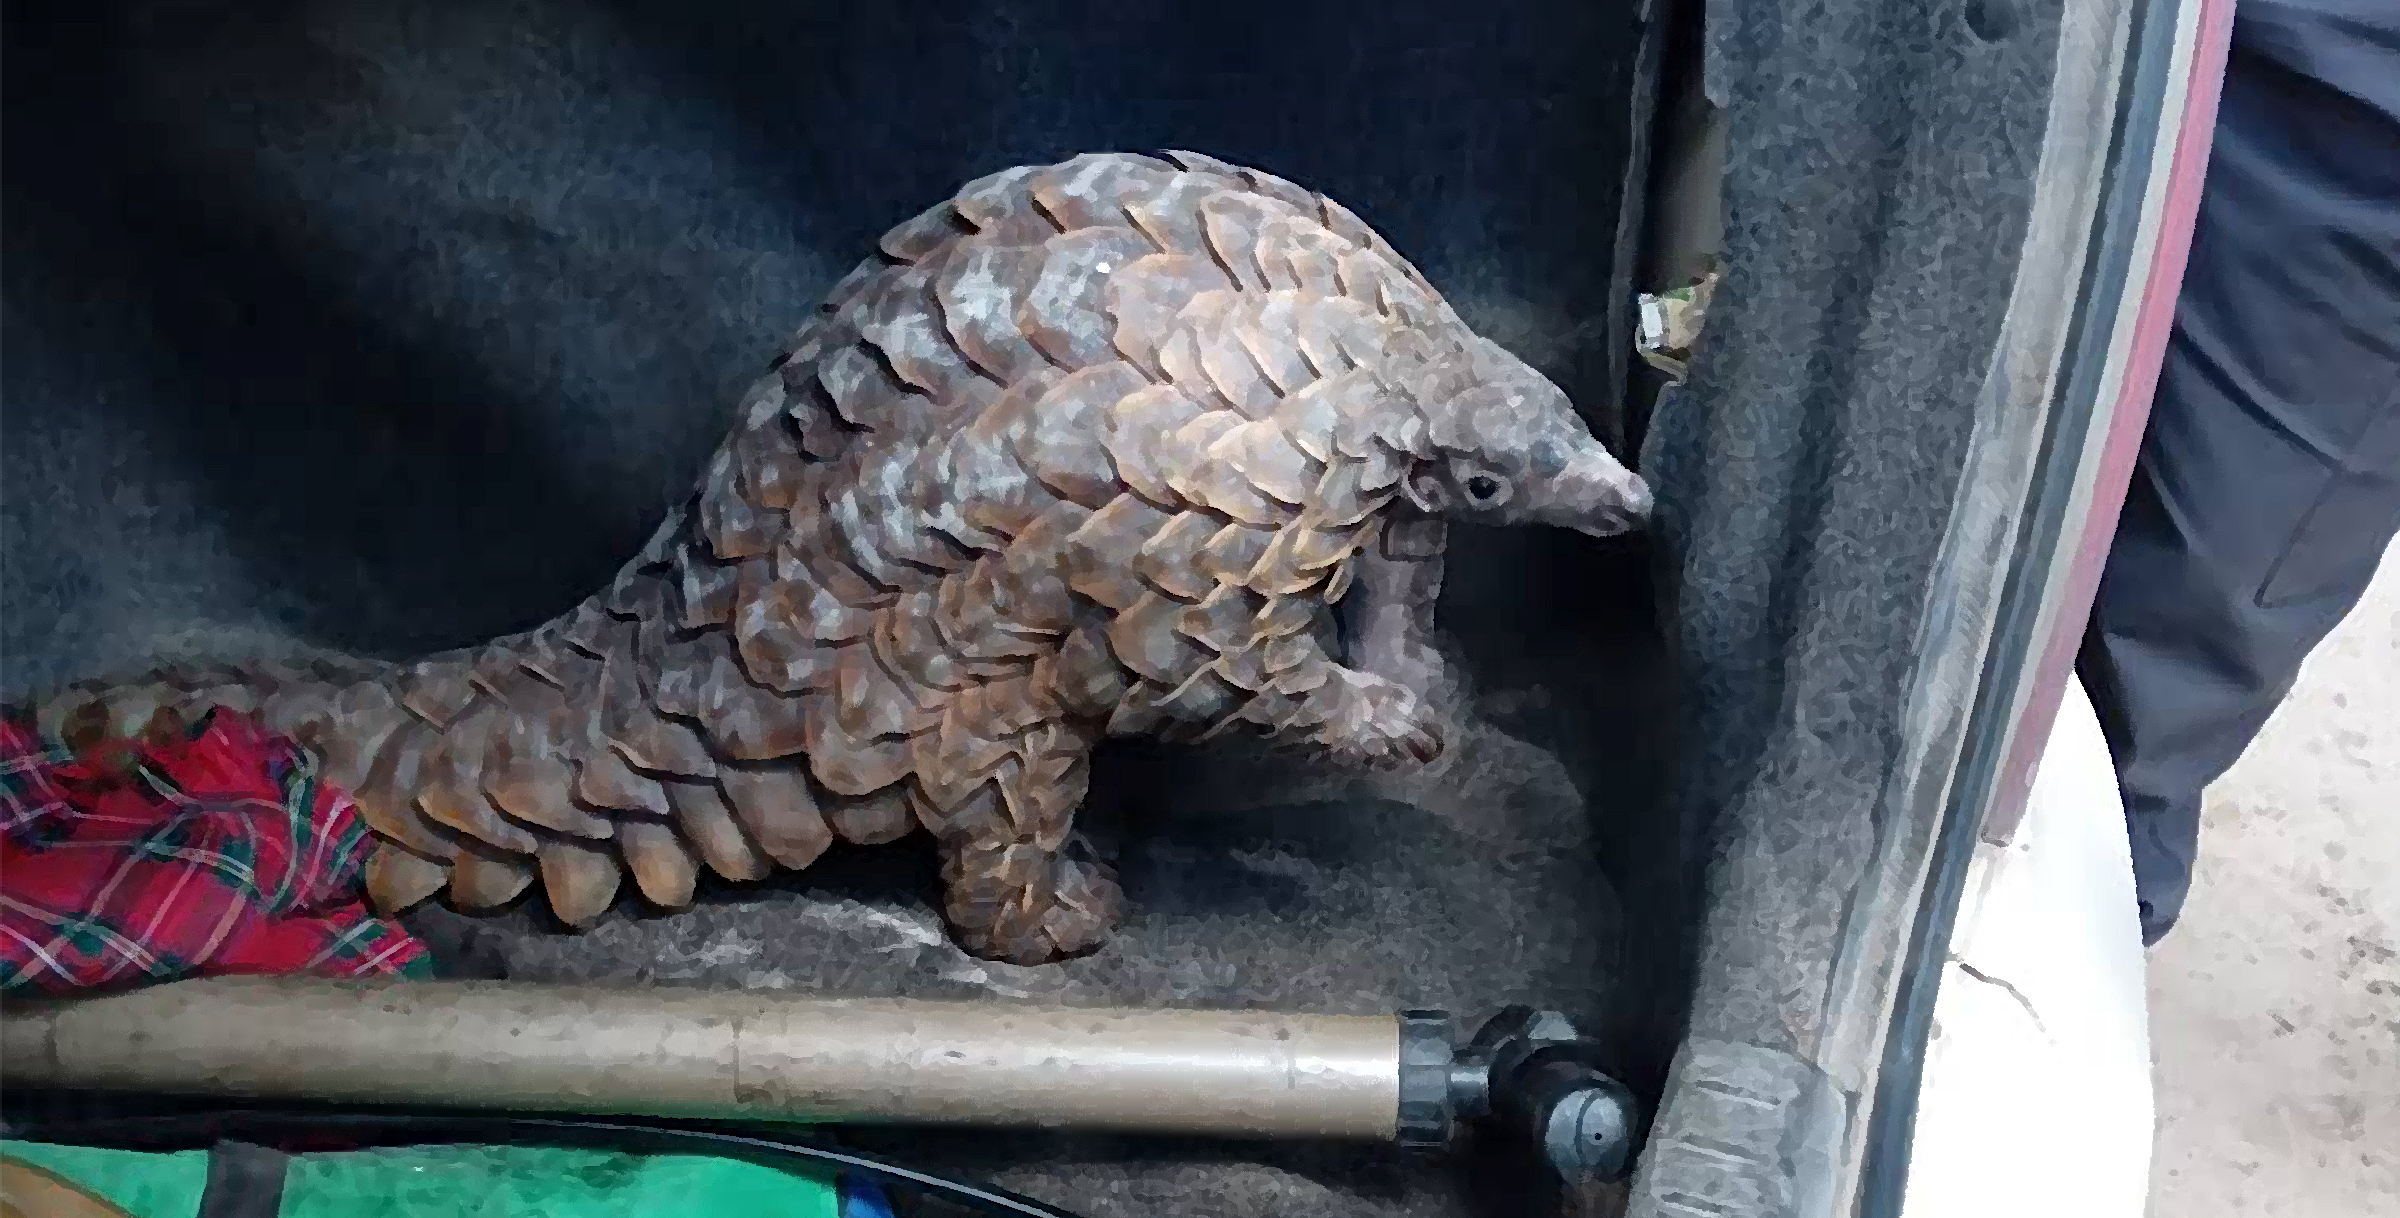 A live pangolin is discovered in the boot of a car.